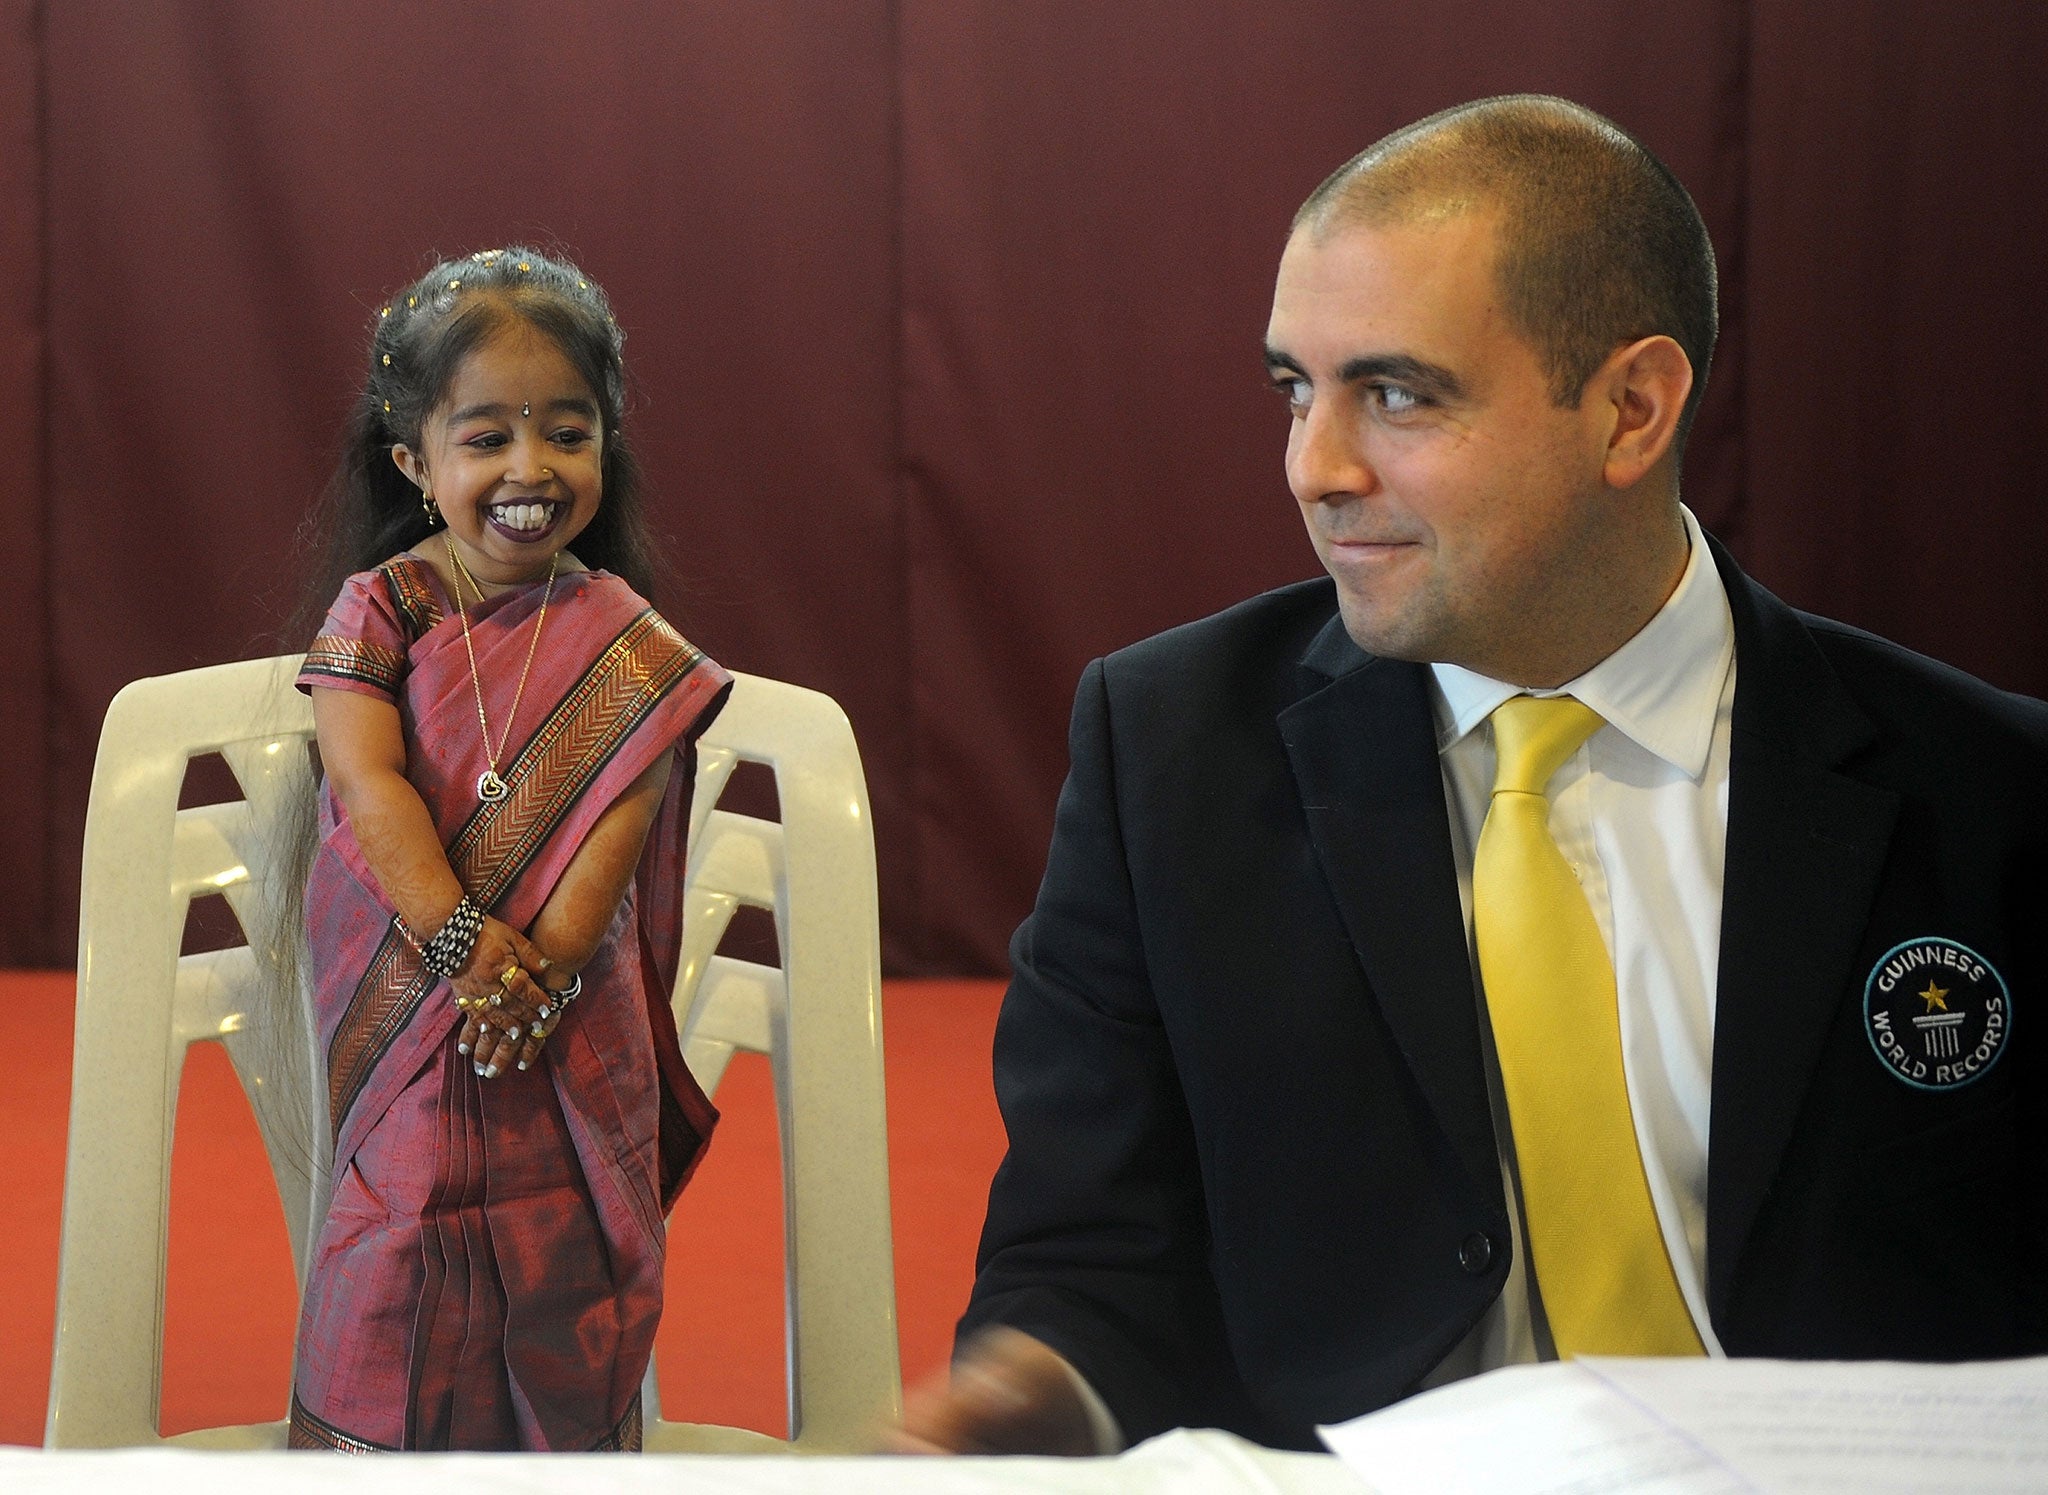 Jyoti Amge with Guinness World Records adjudicator Rob Molloy at a news conference in Nagpur, India